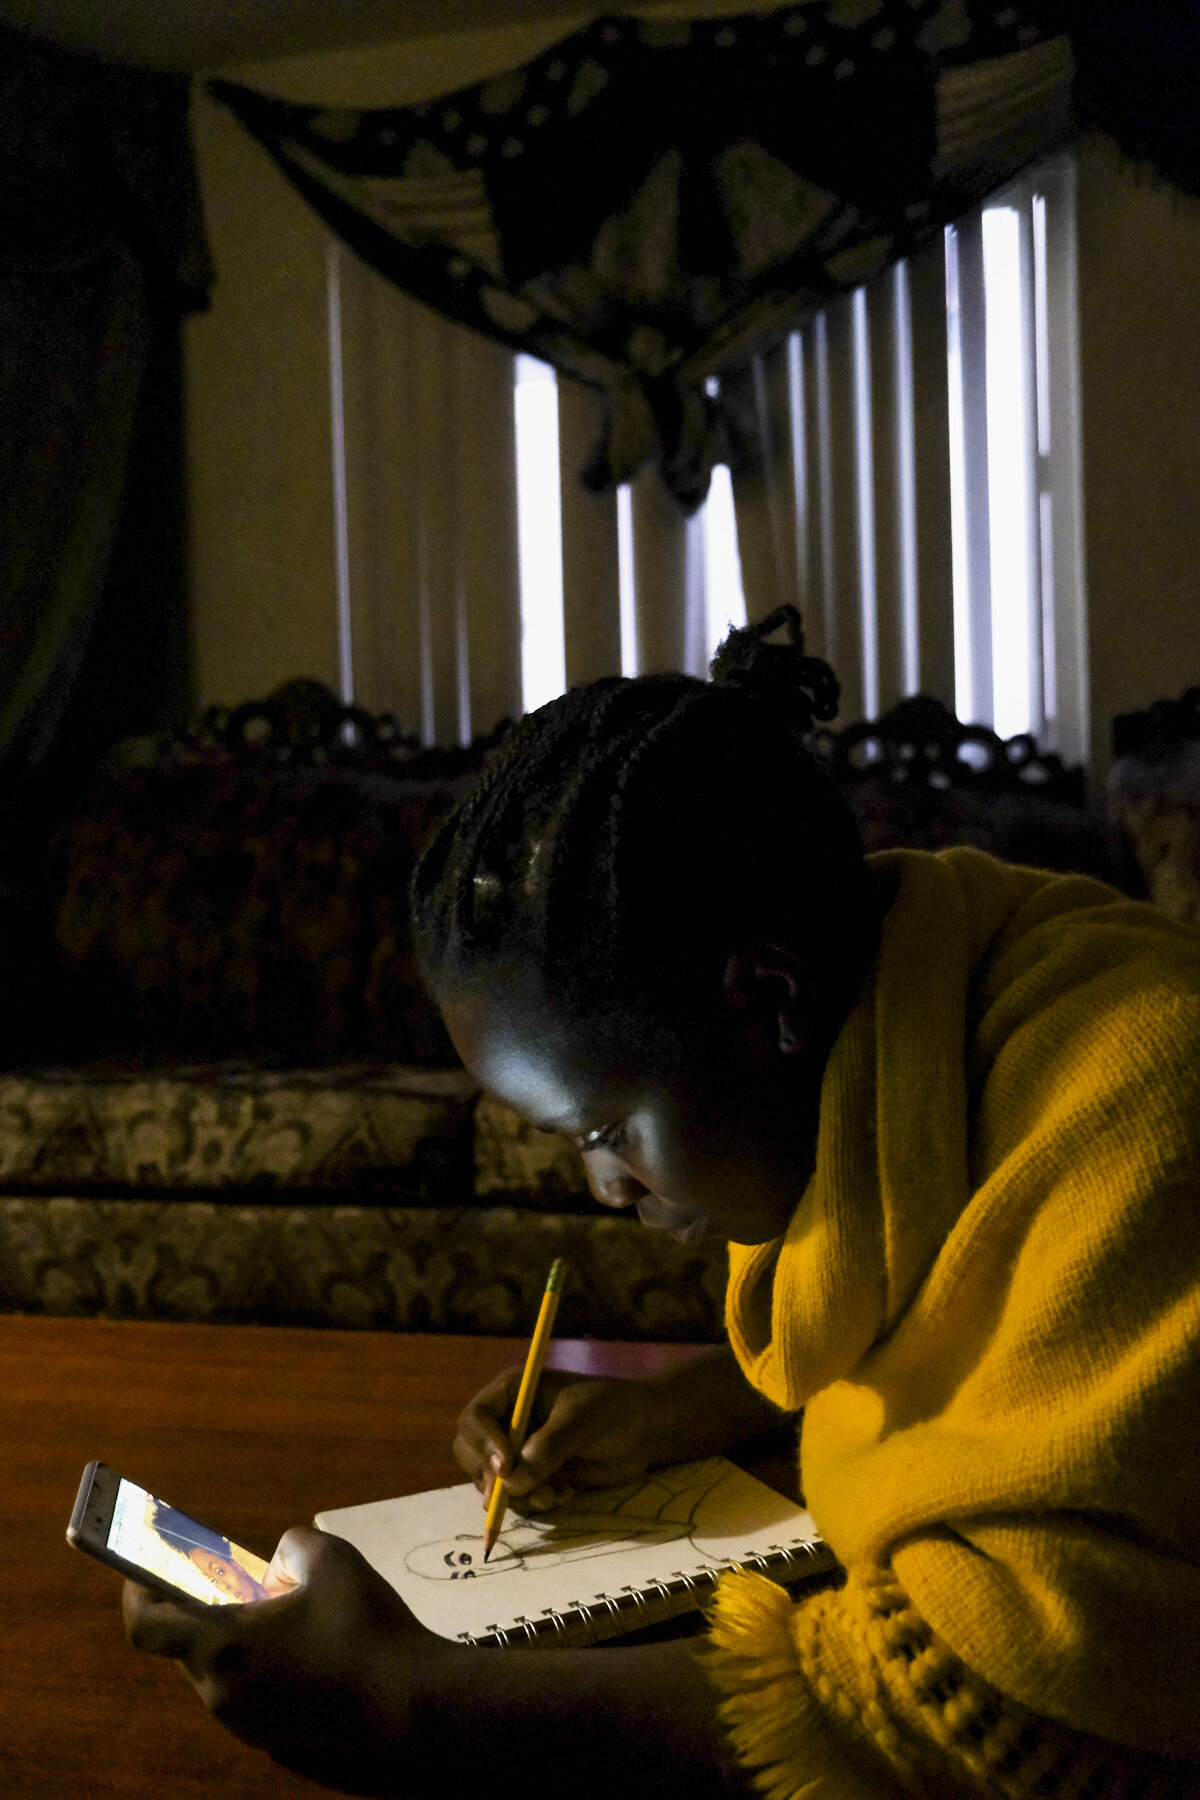  USA, San Diego, CA, October 26, 2020. Mwanini Shabani, 15, draws a model from her Instagram feed. Shabani says art is her escape but doesn’t show many people. After finishing homework, she often draws from 7 to 11 p.m. The International Rescue Commi